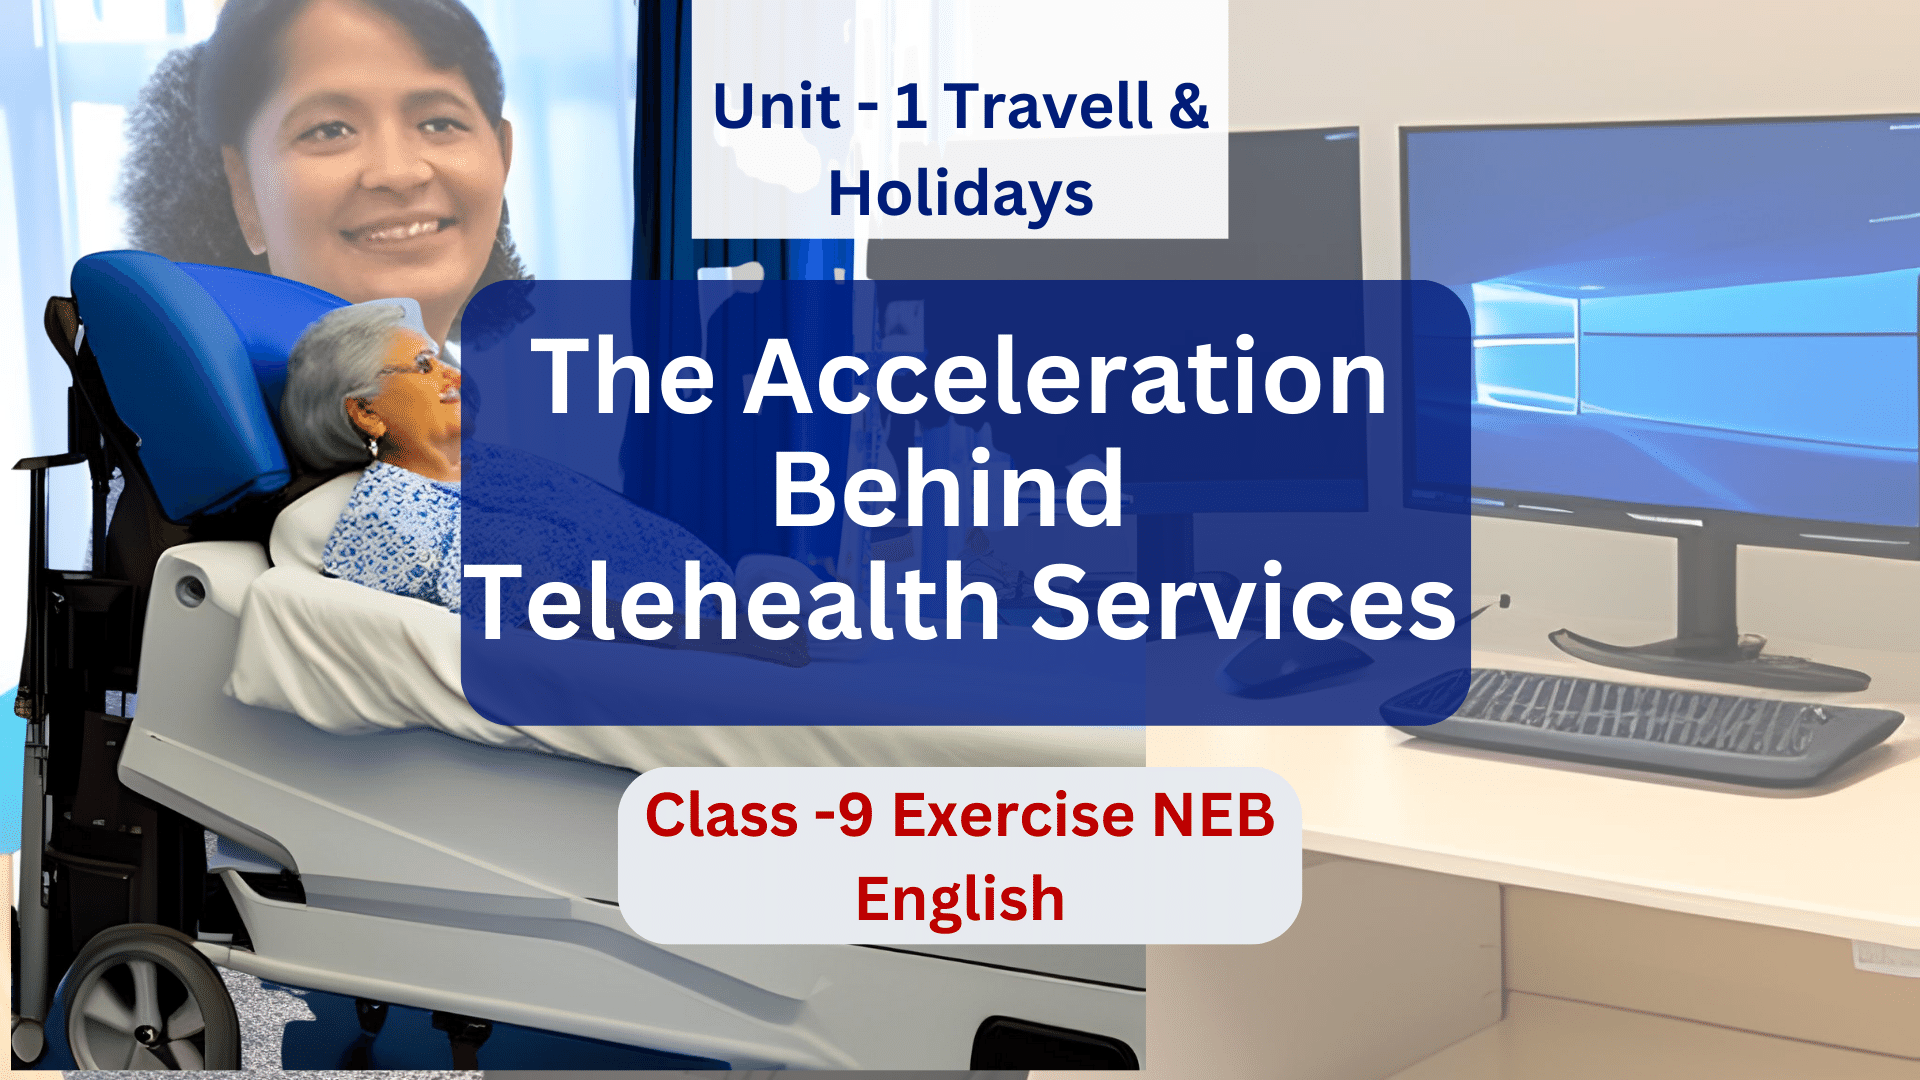 The Acceleration Behind Telehealth Services – Class 9 English Exercise